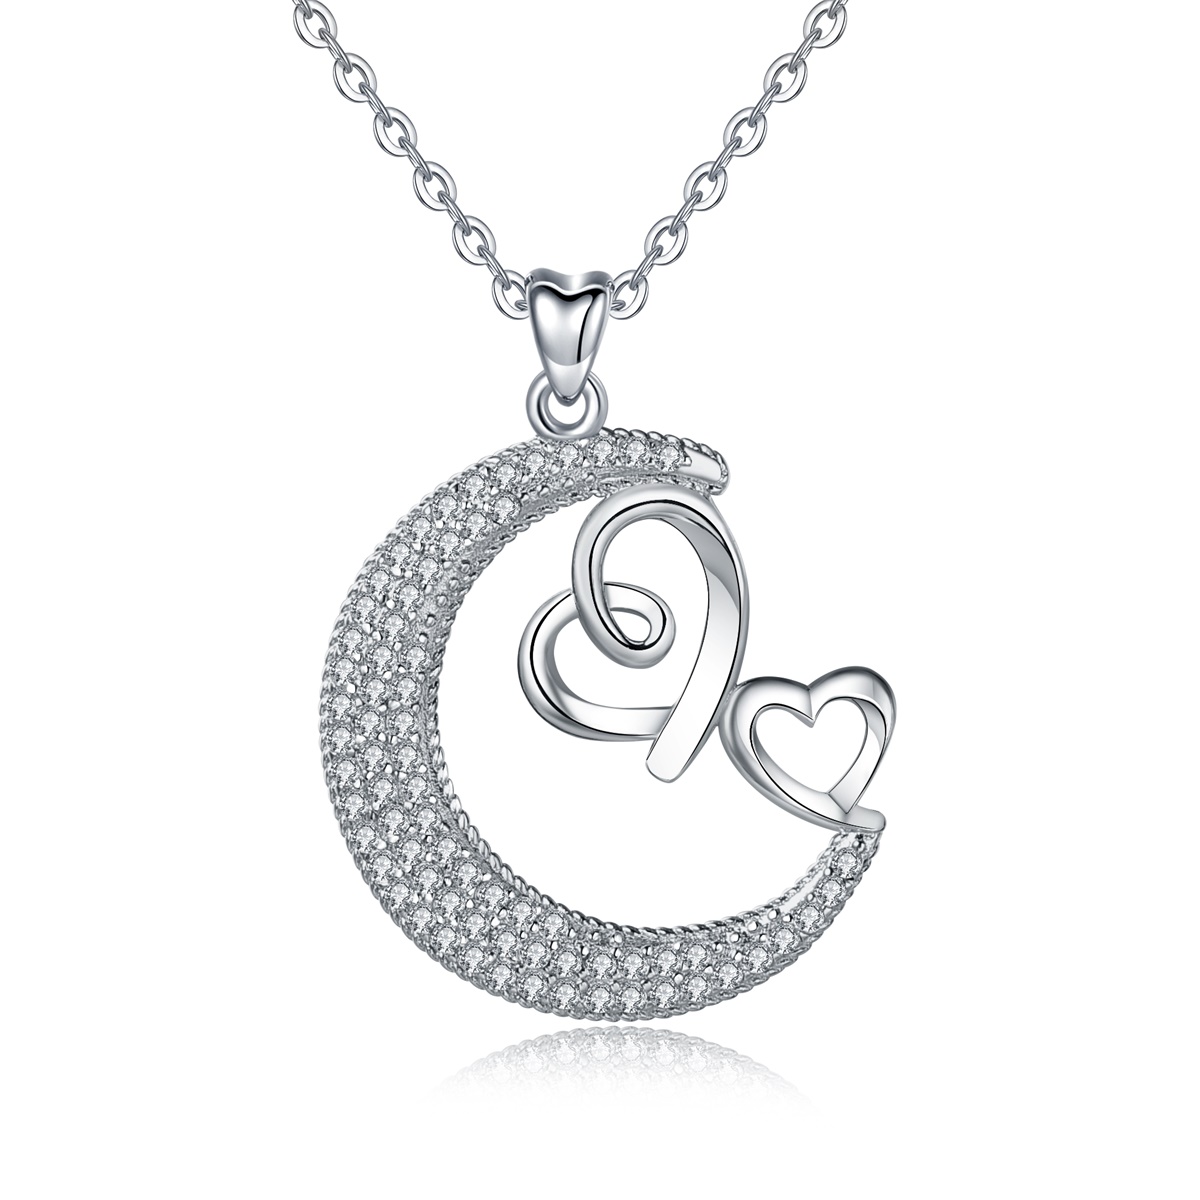 Merryshine Jewelry Dainty Micro CZ Diamond S925 Sterling Silver Heart and Moon Necklace